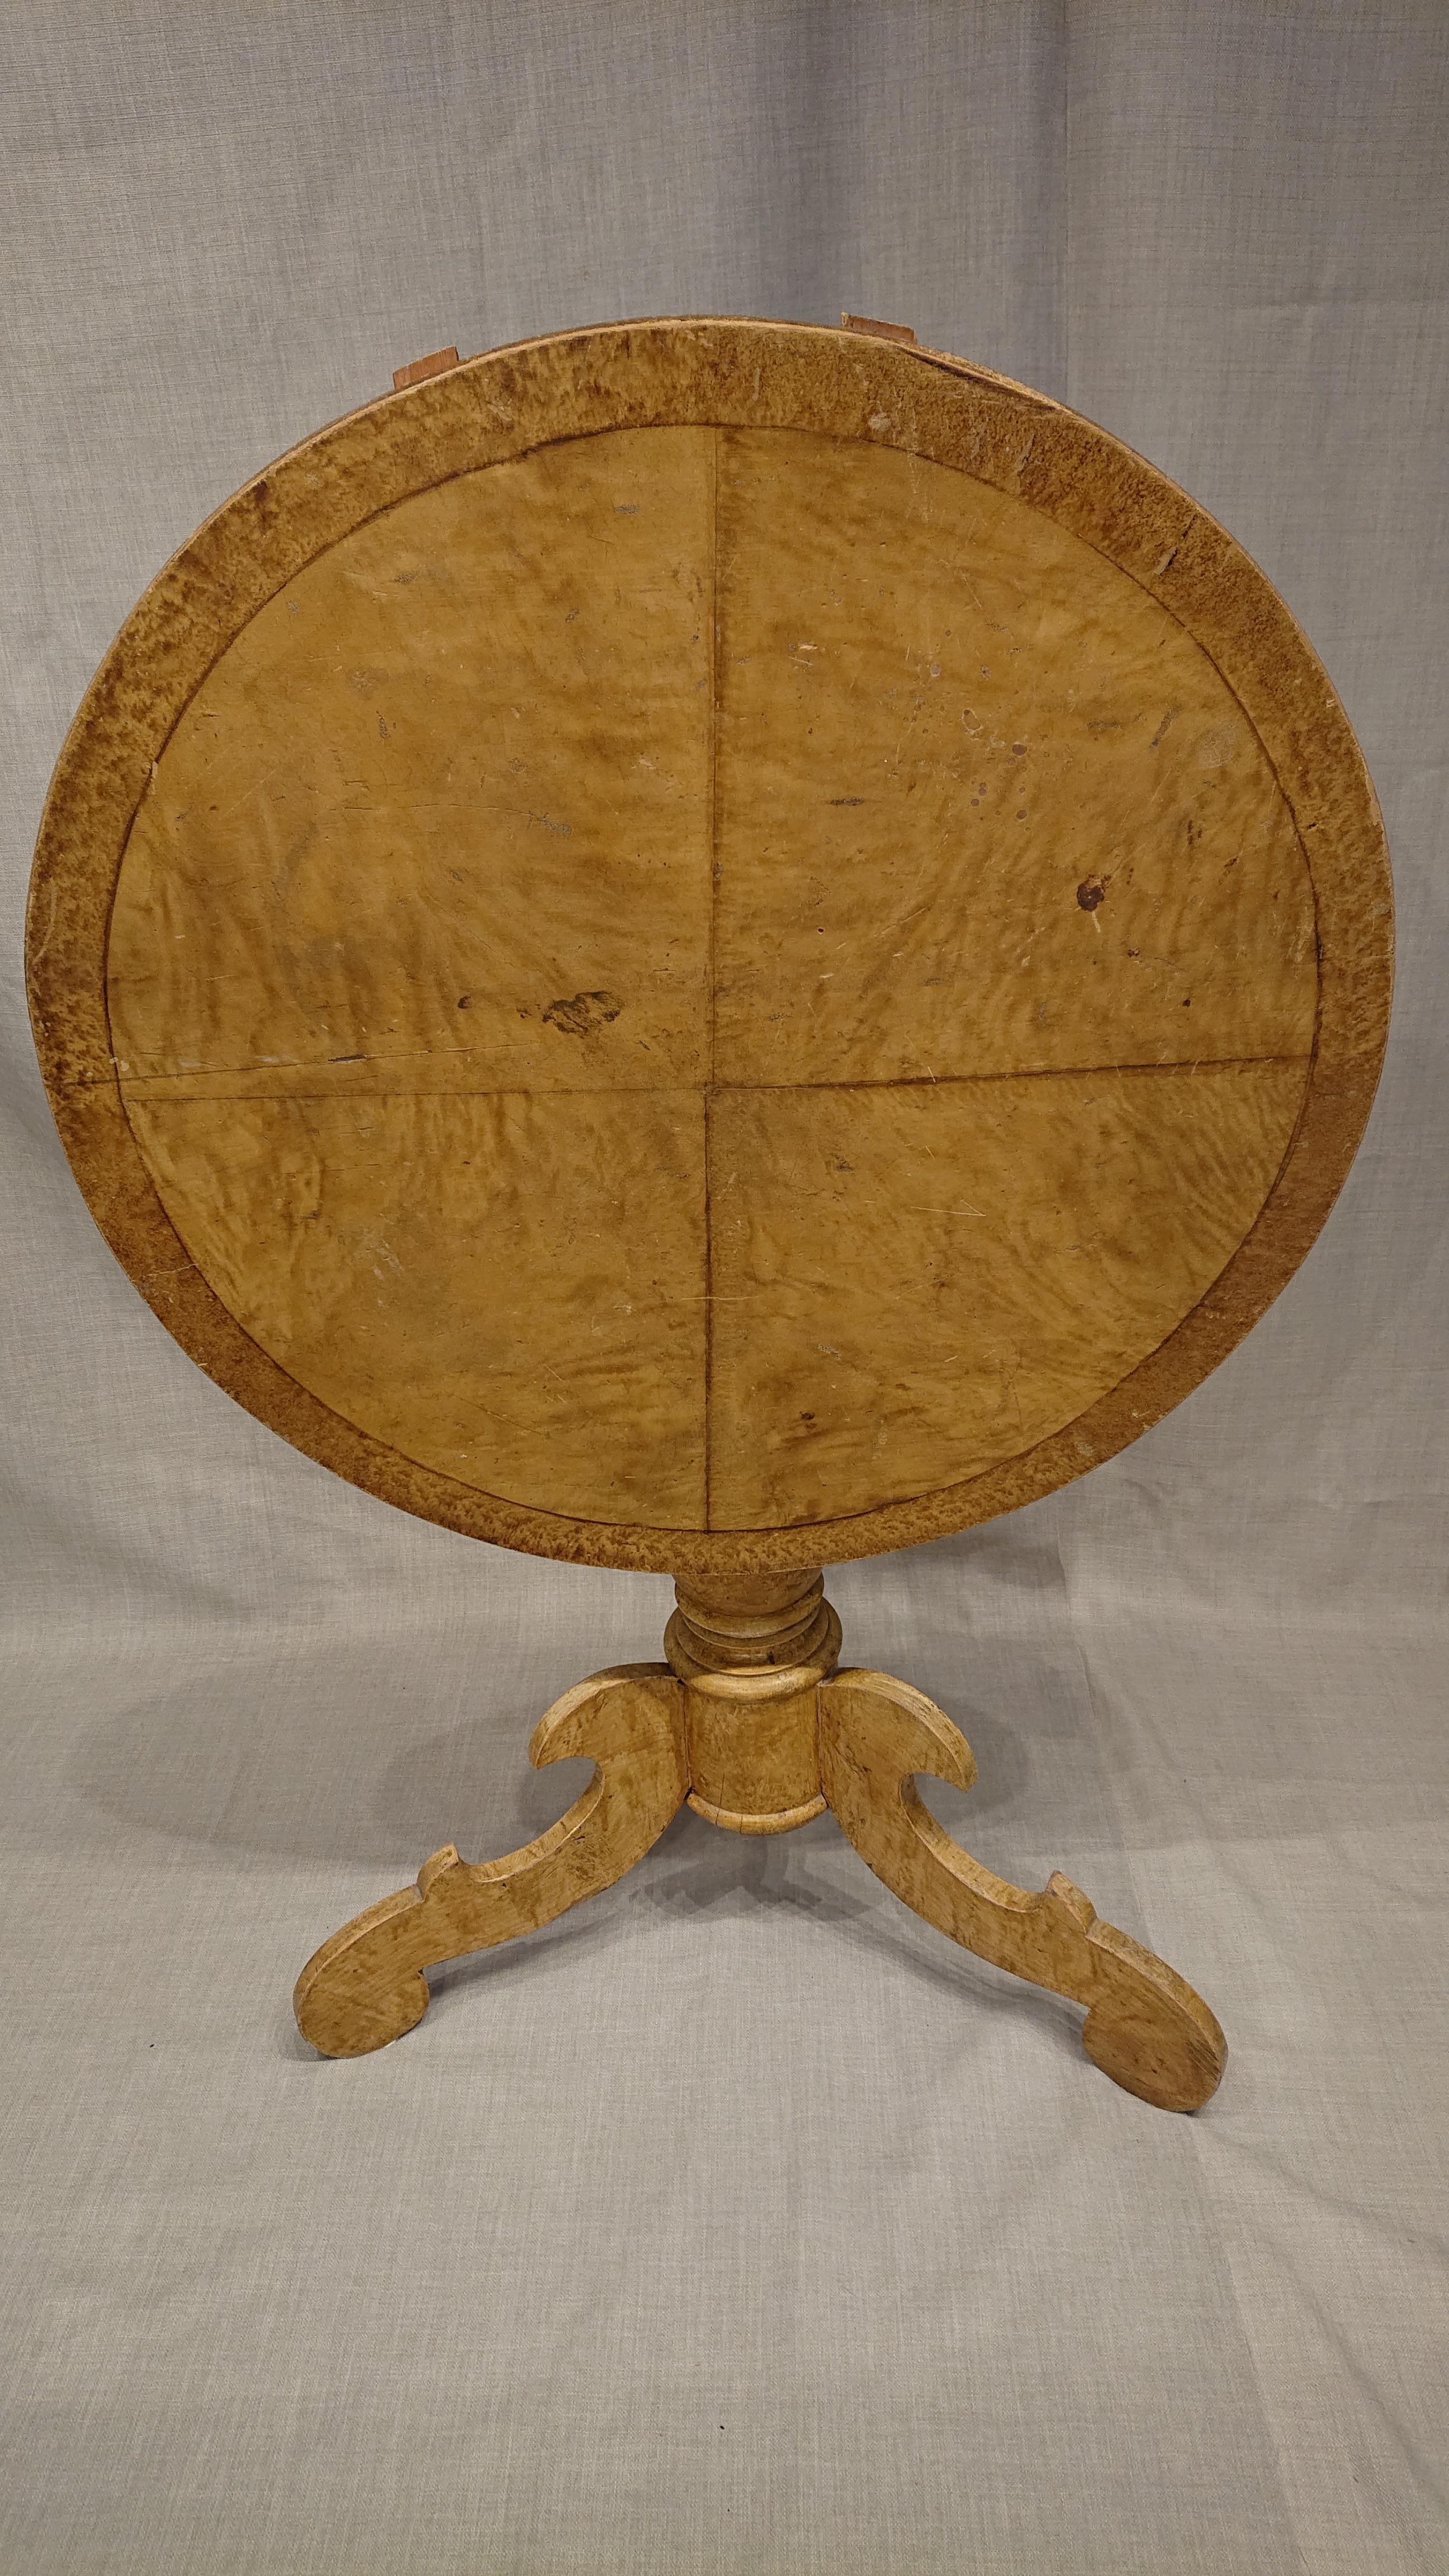 19th century Swedish tilt top table with beautiful untouched original paint from Boden Norrbotten, Northern Sweden.
A fantastically beautiful tilt top table with fine proportions & fine wood imitation painting on the top.
A nice & useful table as